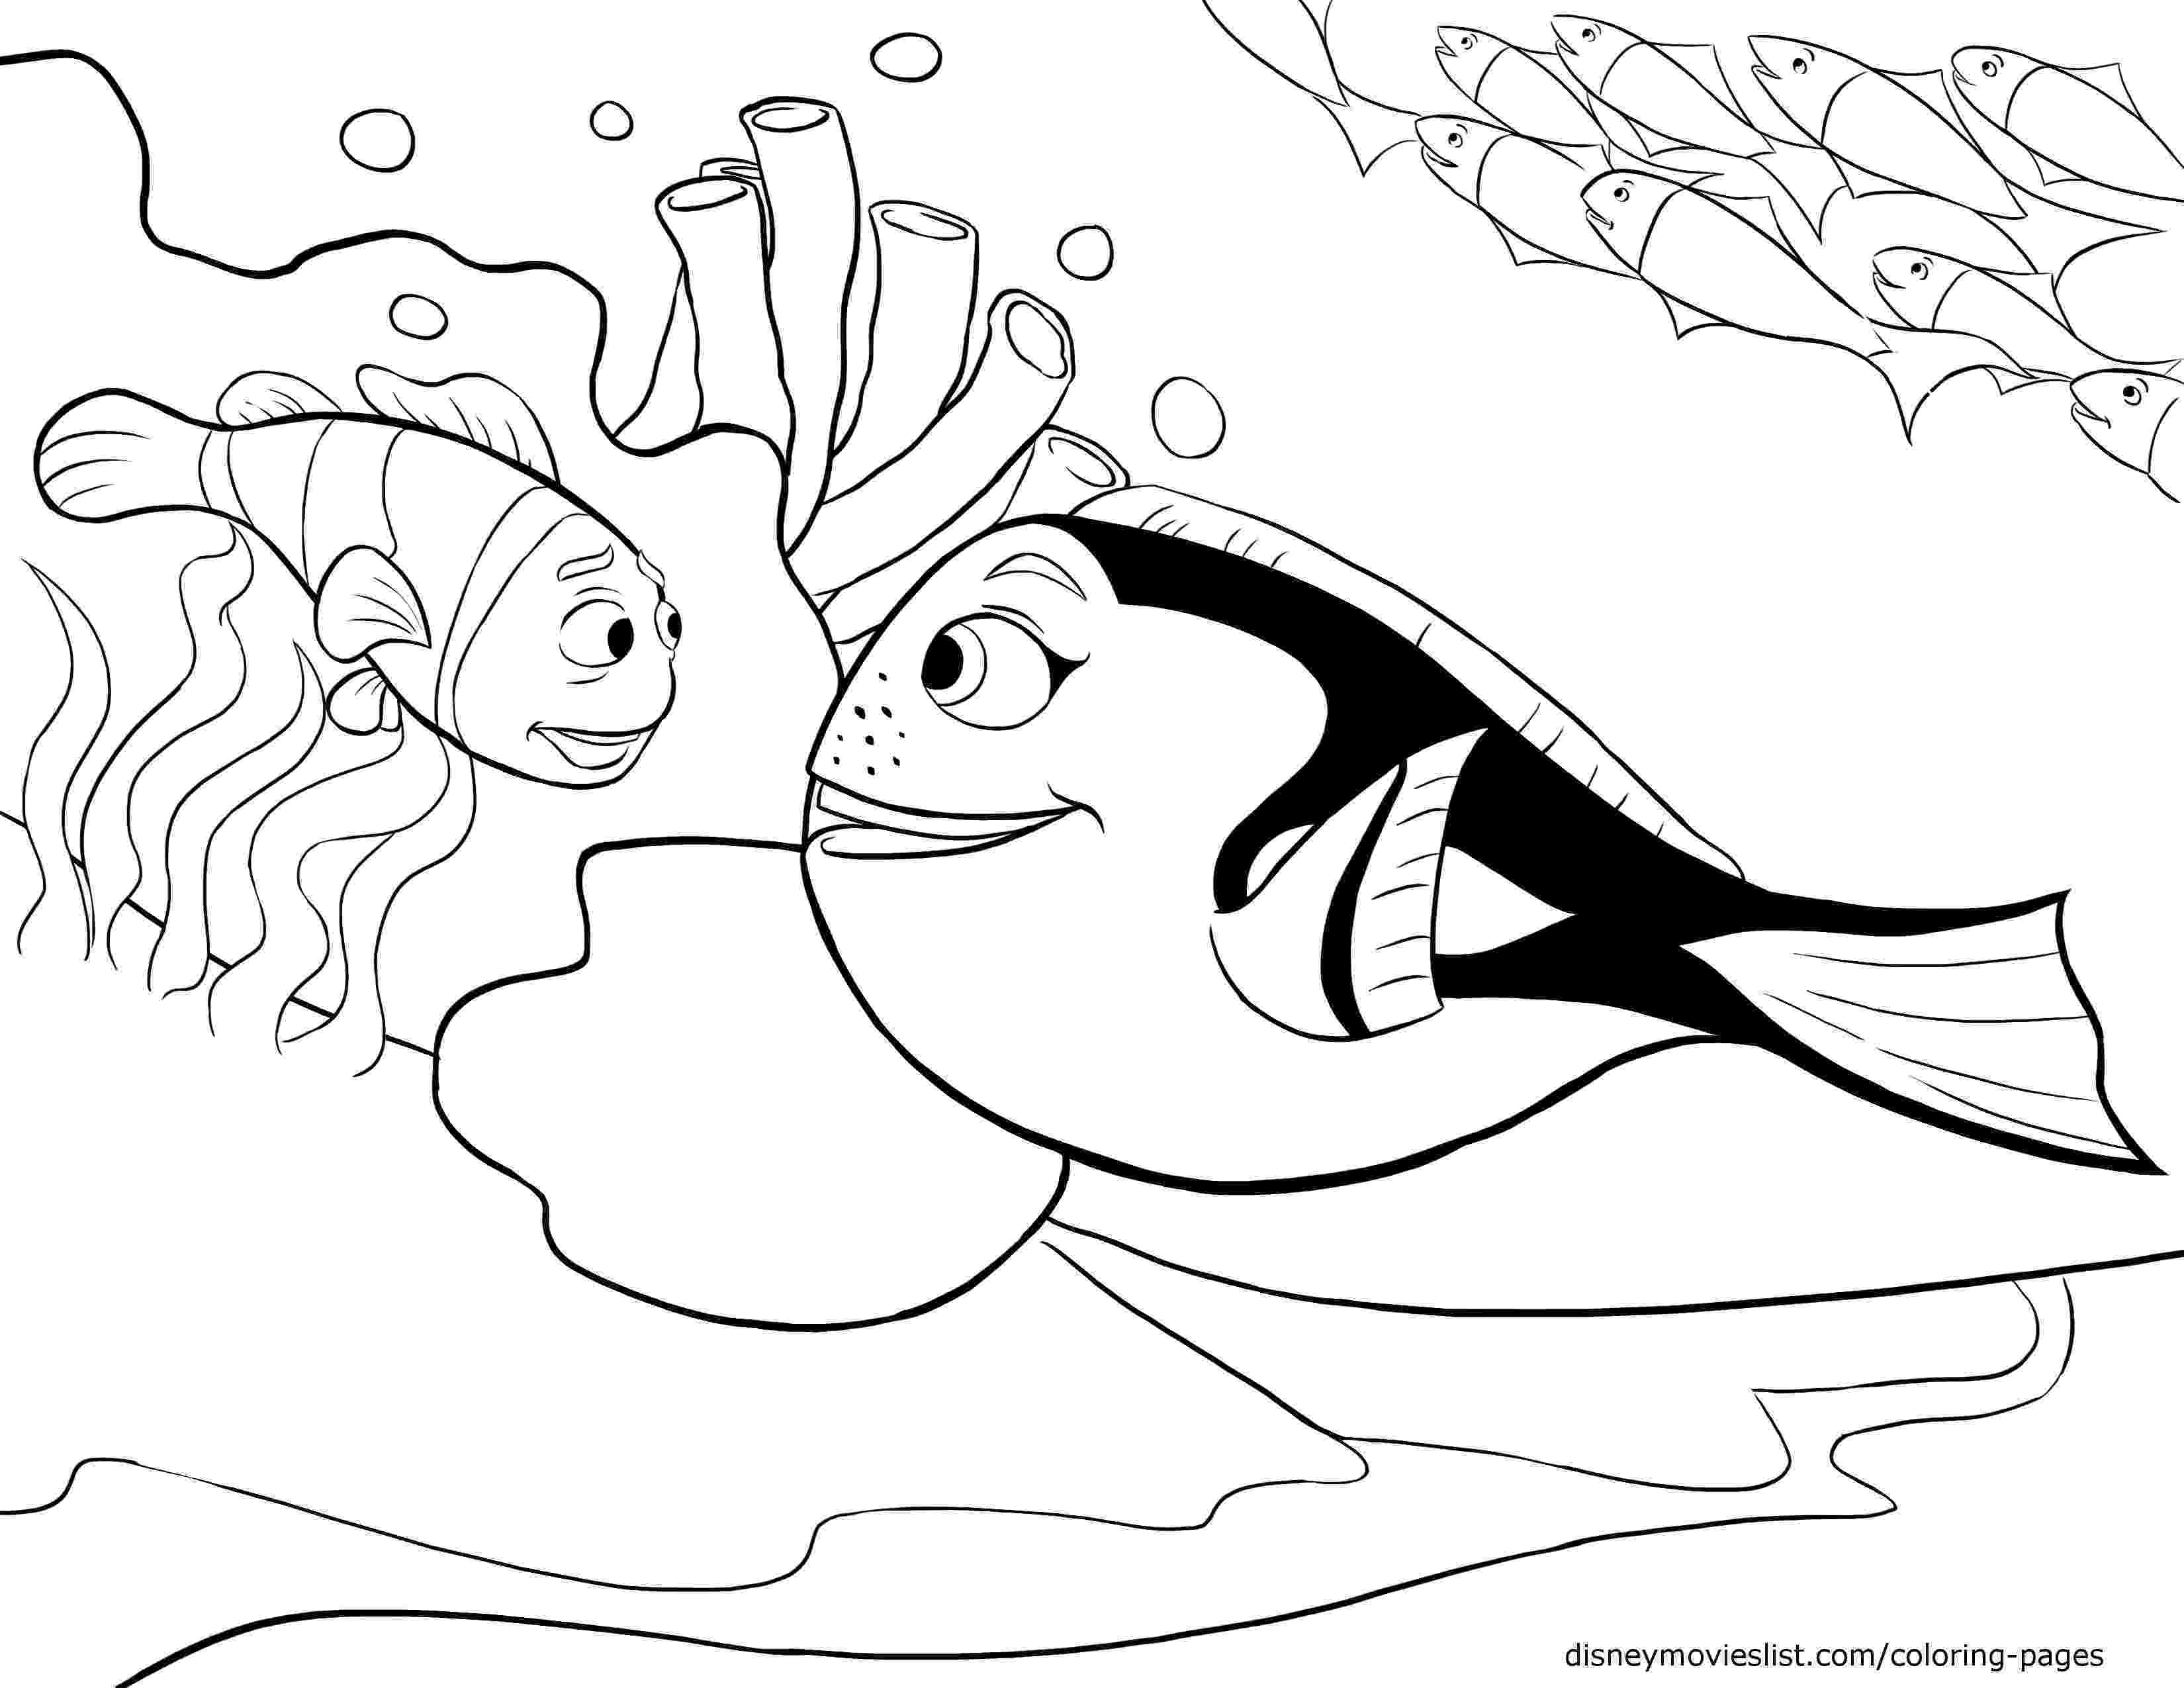 coloringpages the muppets coloring pages disneyclipscom coloringpages 